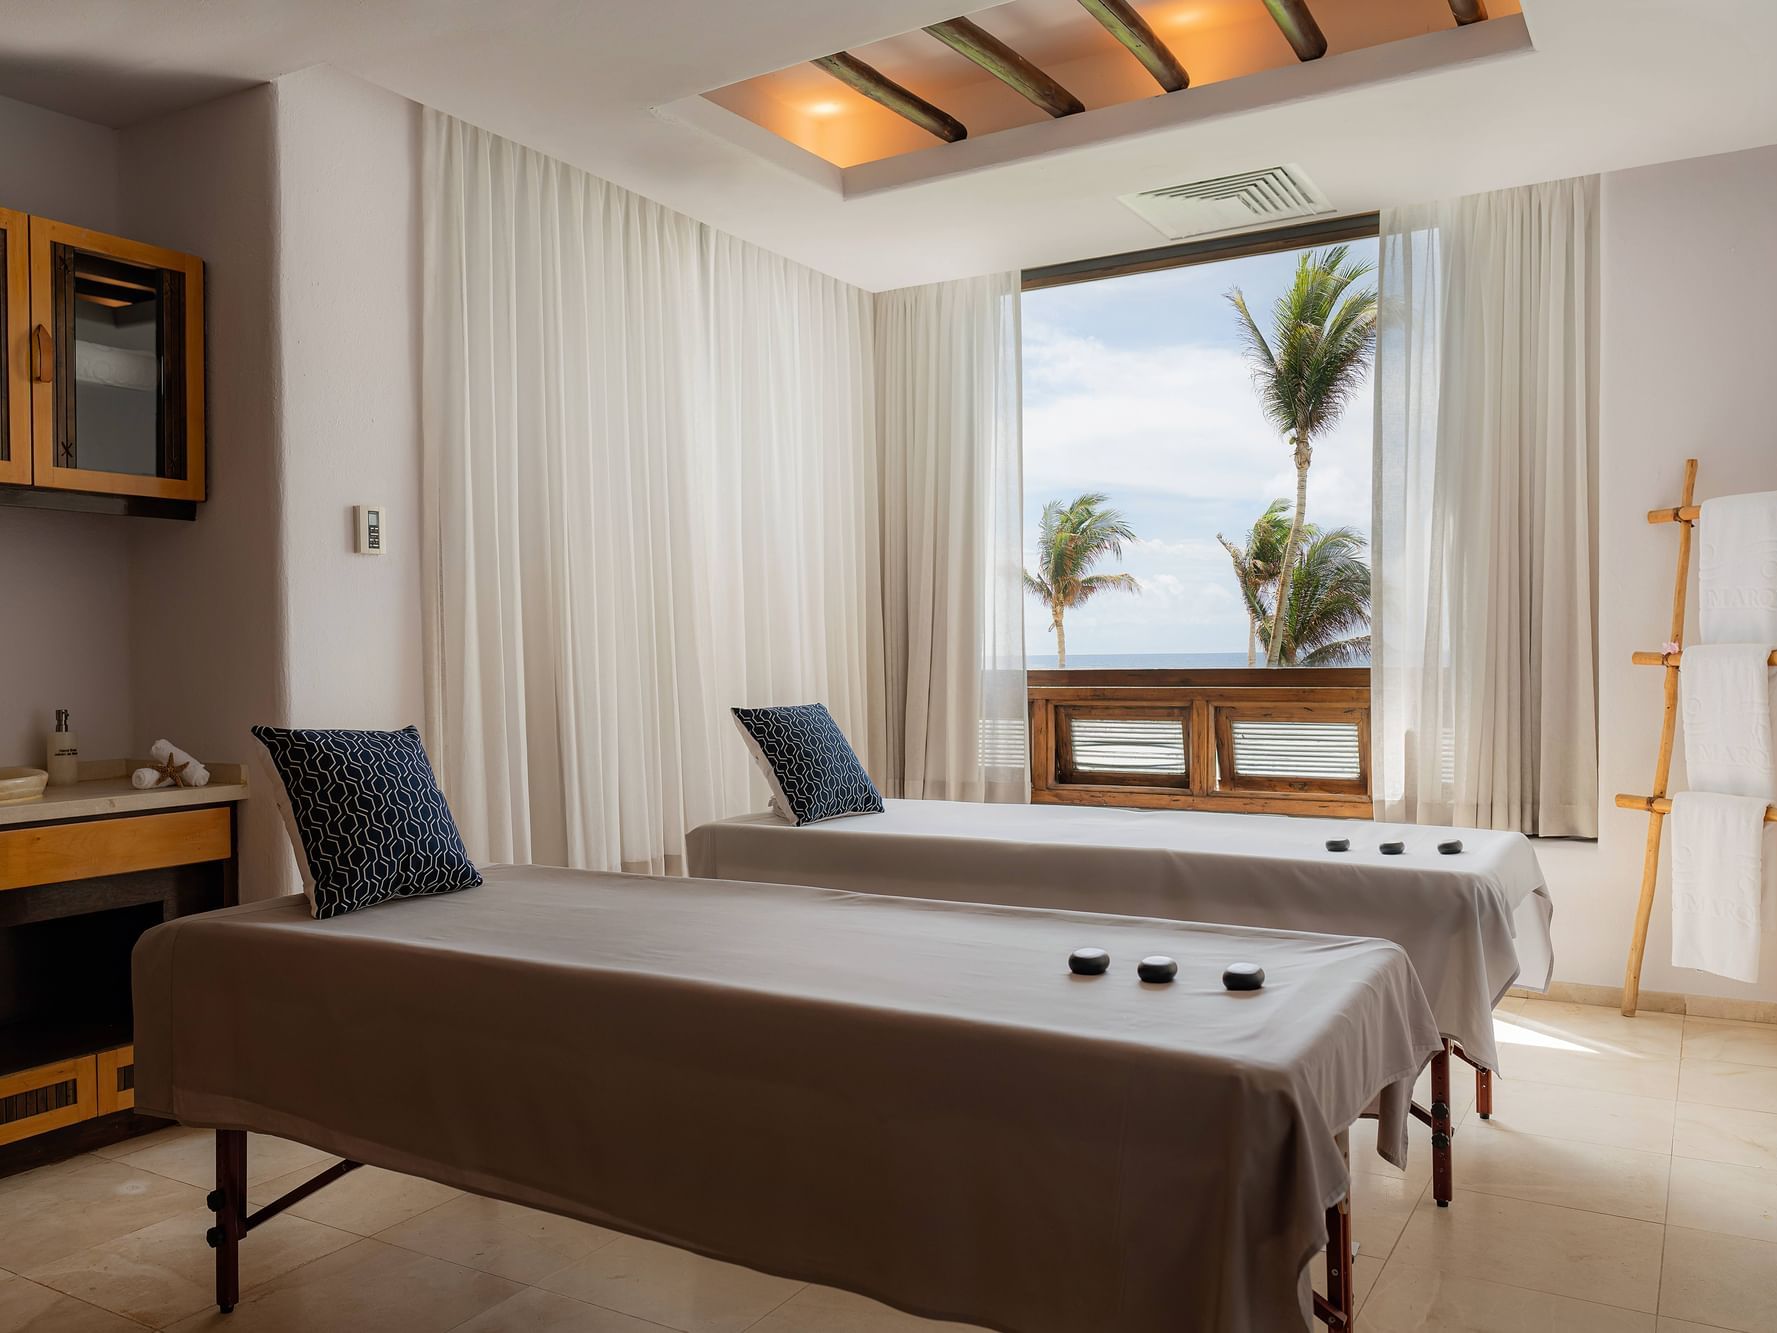 A relaxing massage cabin with two massage tables, overlooking the sea.